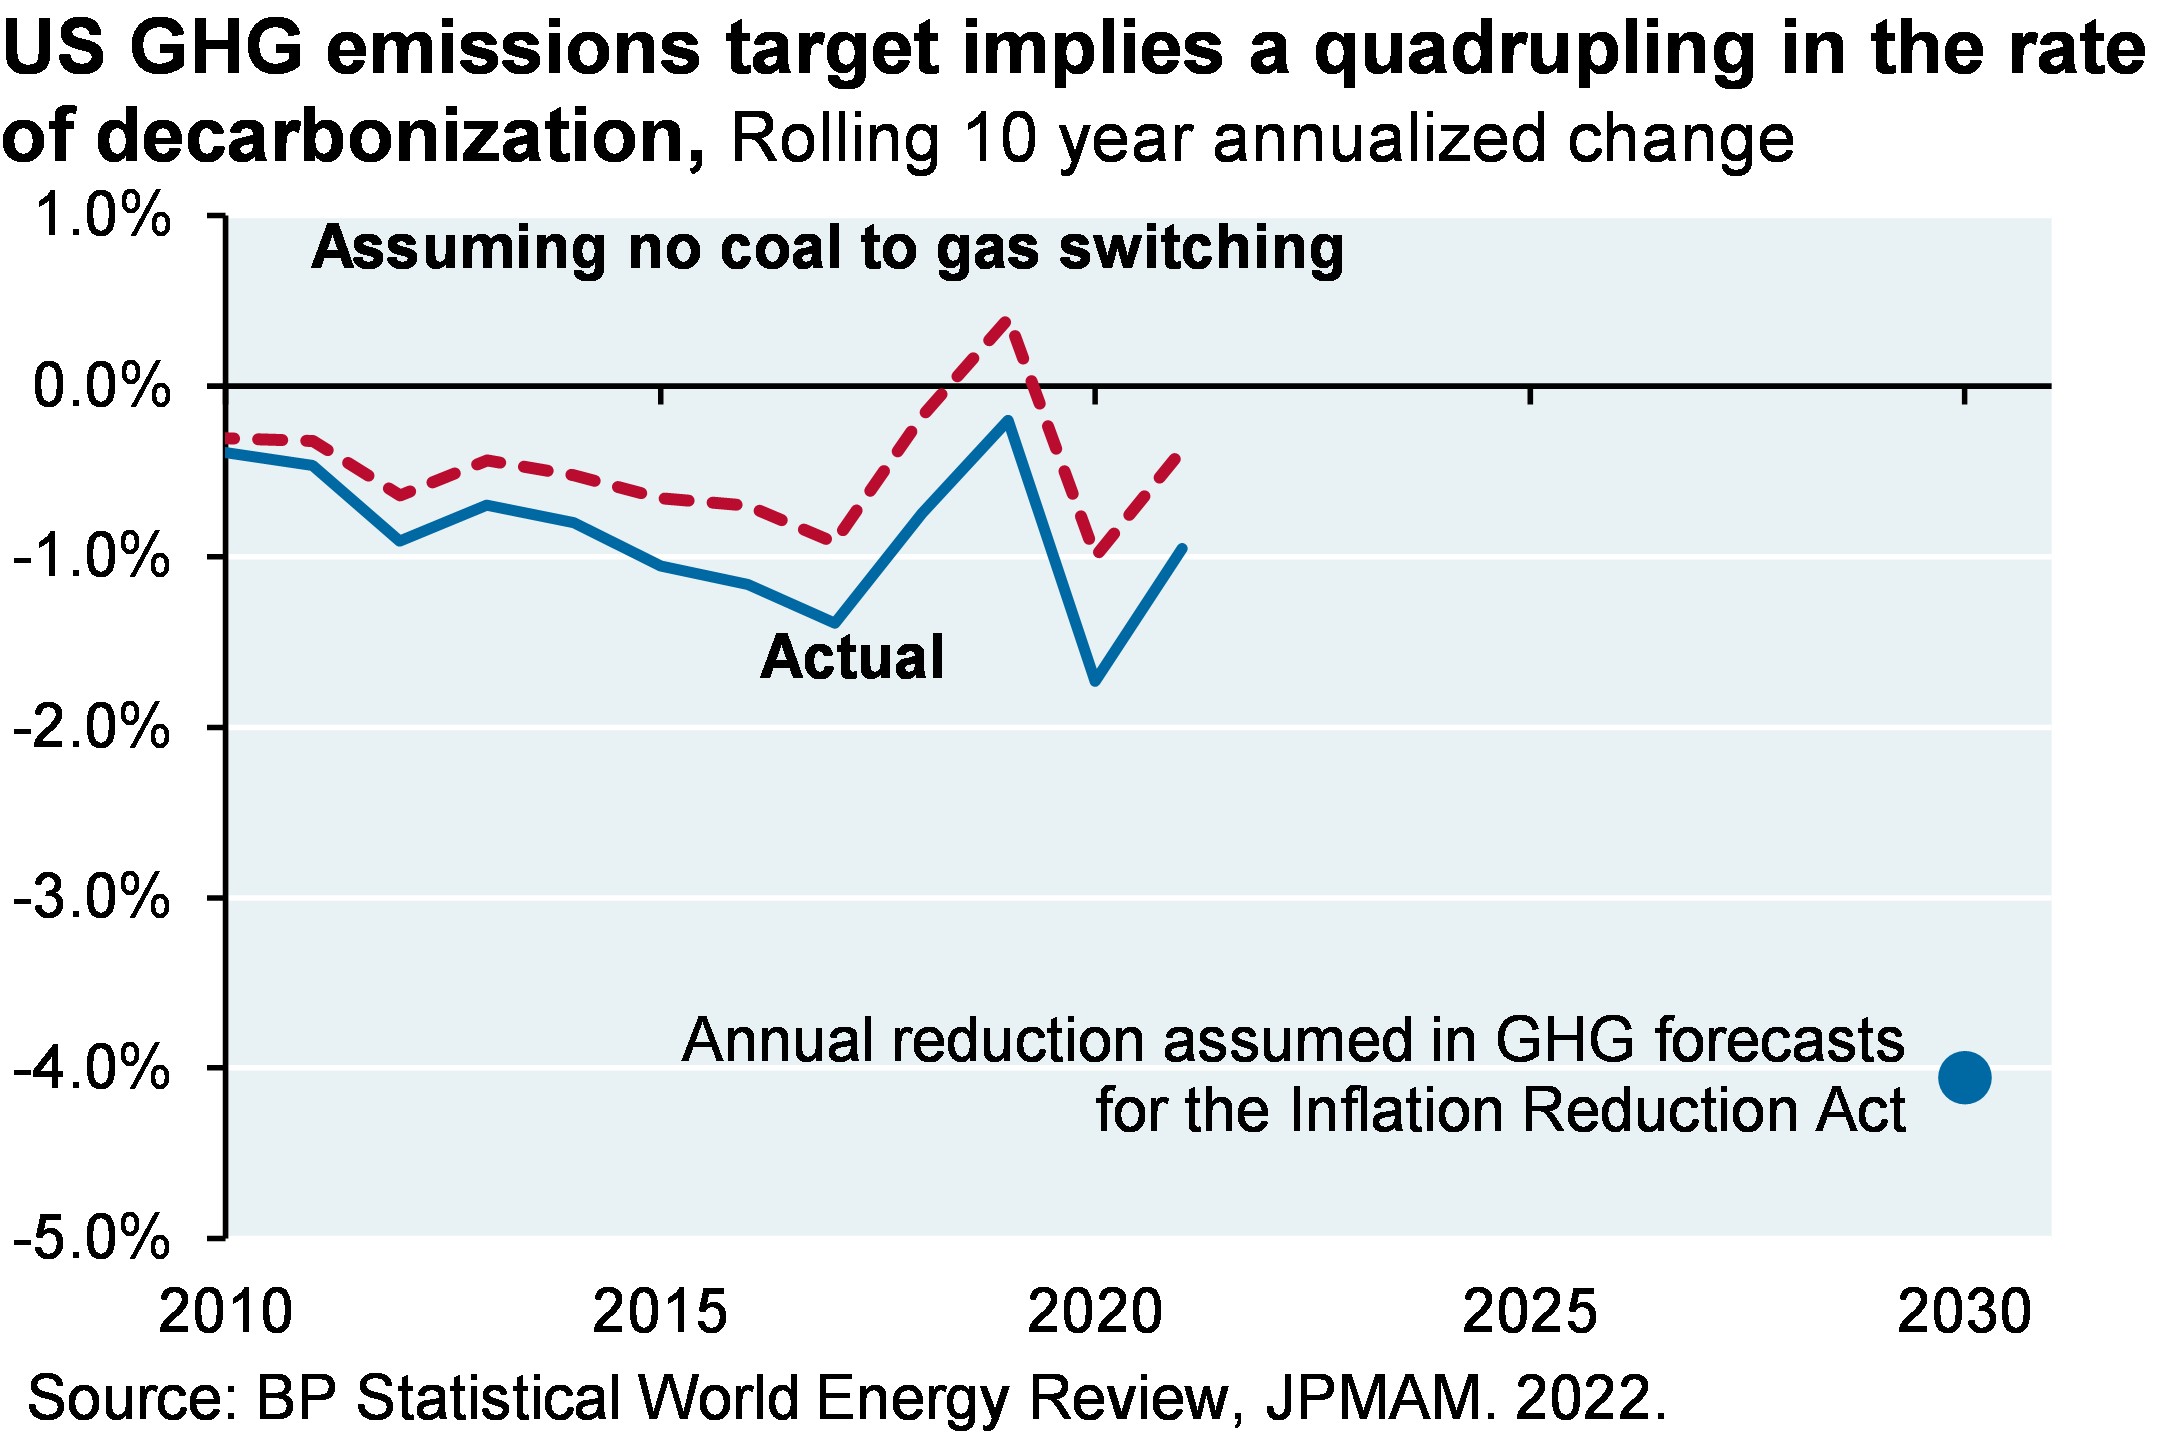 US GHG emissions target implies quadrupling in the rate of decarbonization